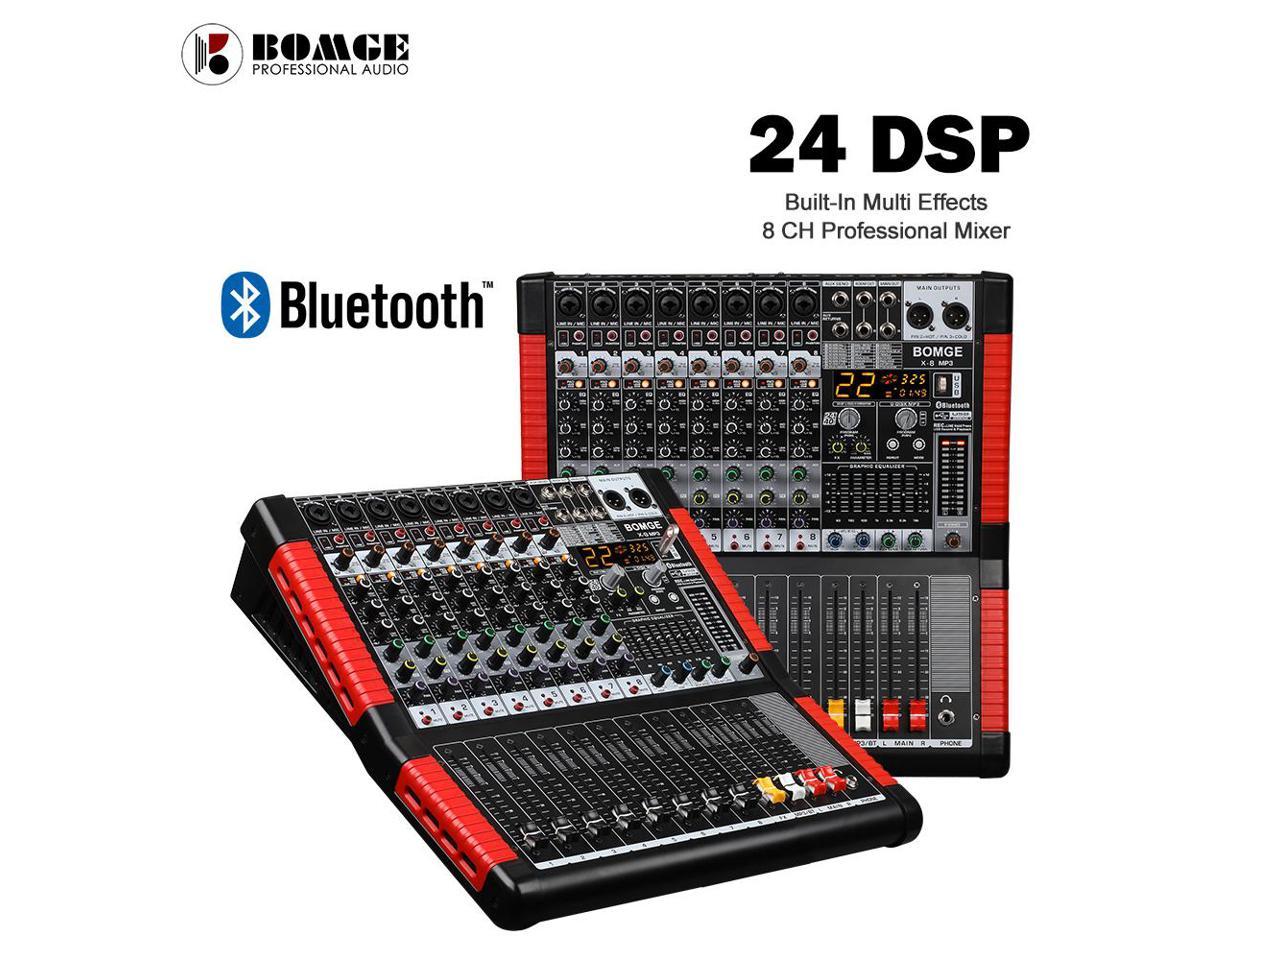 BOMGE X-8 Professional 8 Channel Audio Mixer Sound Board Mixing Console 8  Mic/Line Input Interface USB/MP3/Bluetooth Input 48V Phantom Power 24 FX  DSP For PC, Studio Recording, Live Performance - Newegg.com